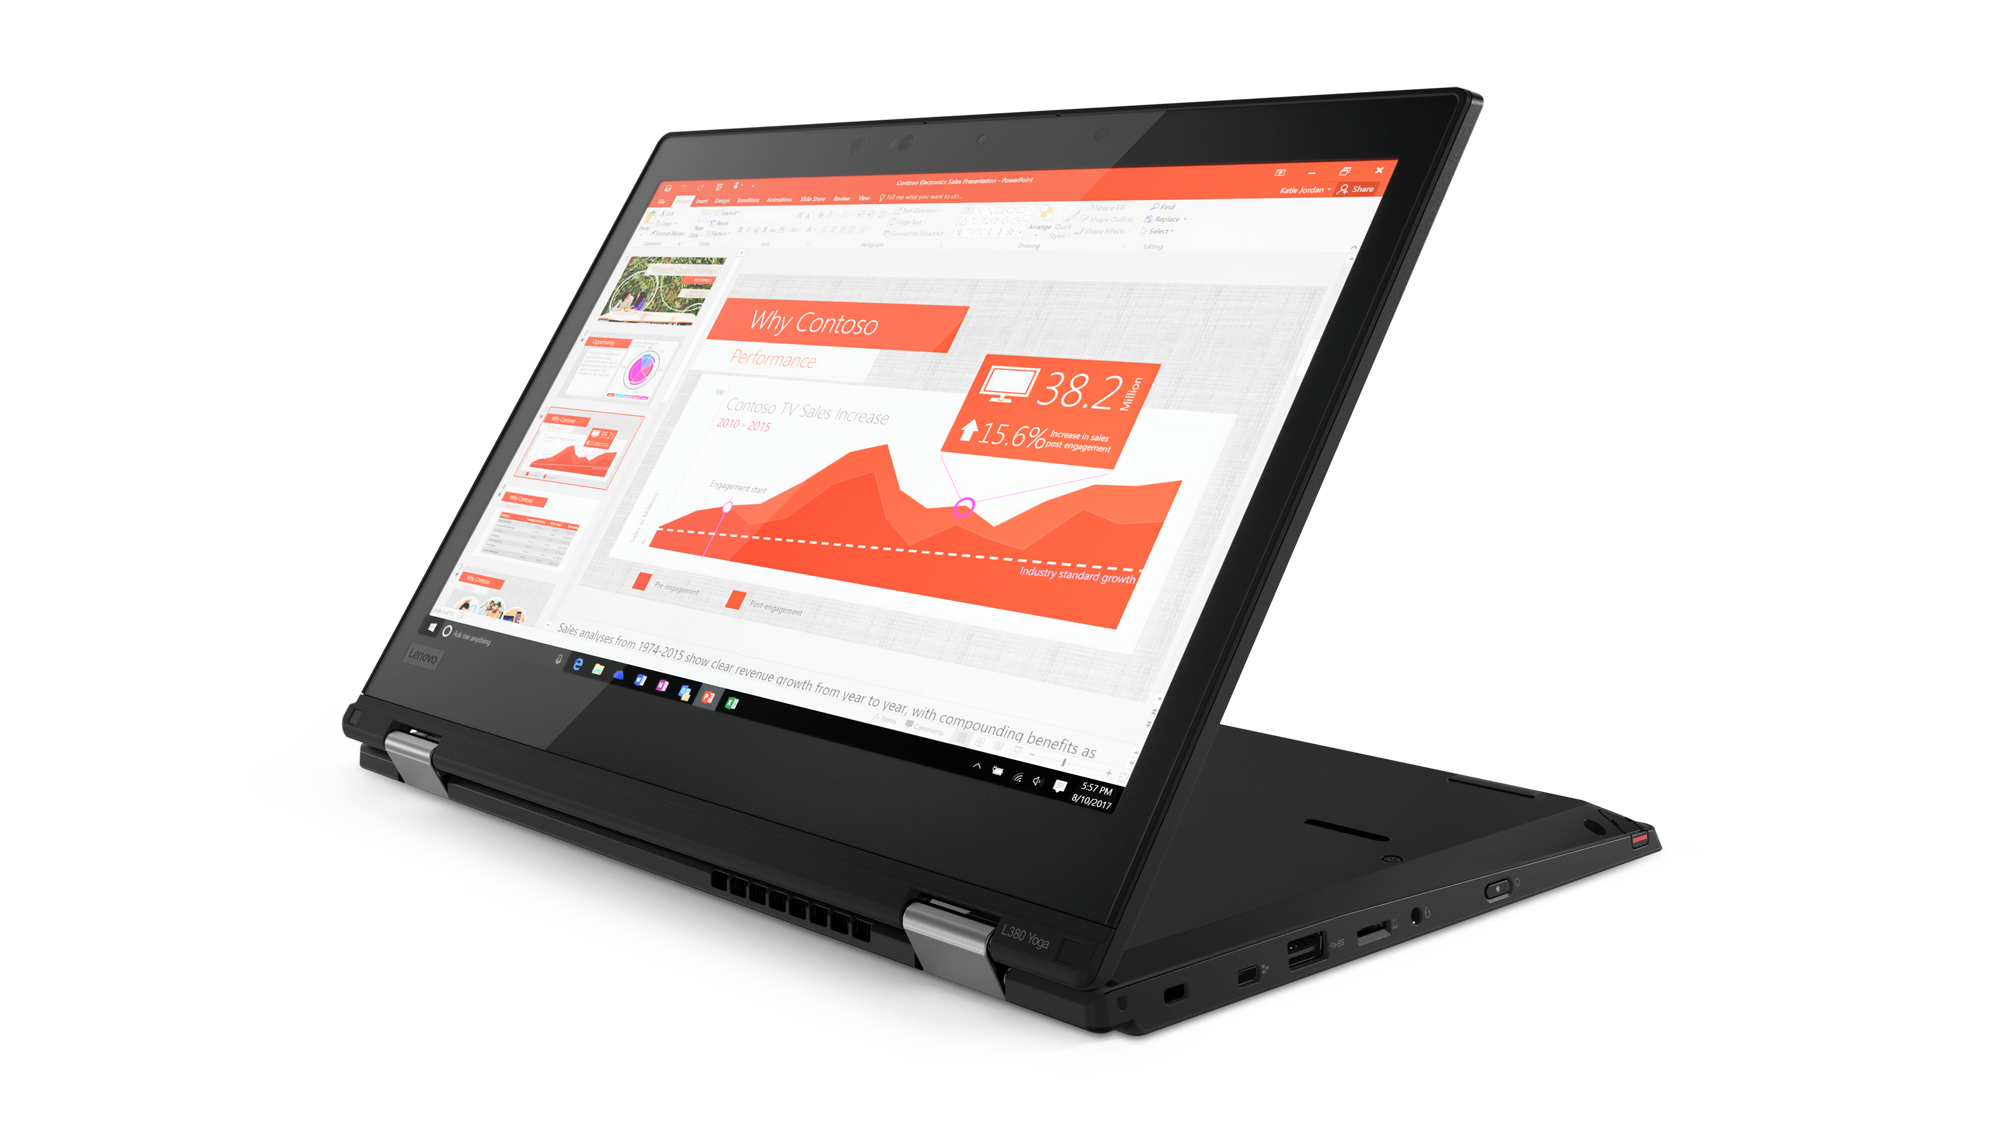 Lenovo updates ThinkPad lineup with eighth-gen Intel chips, thinner